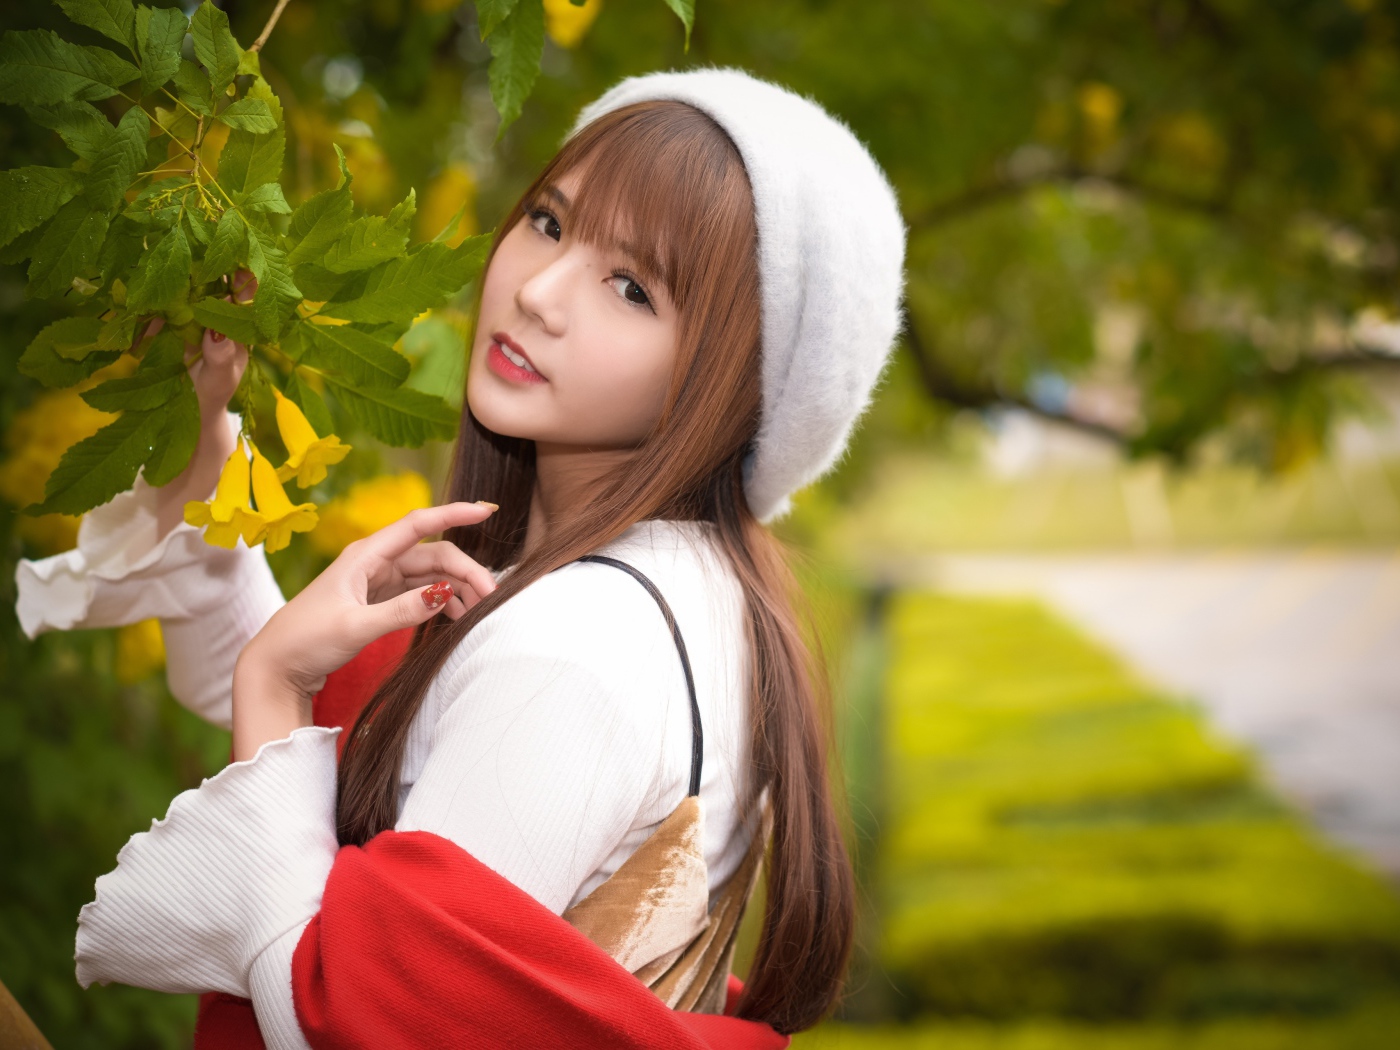 A girl in a beret stands by a bush with yellow flowers